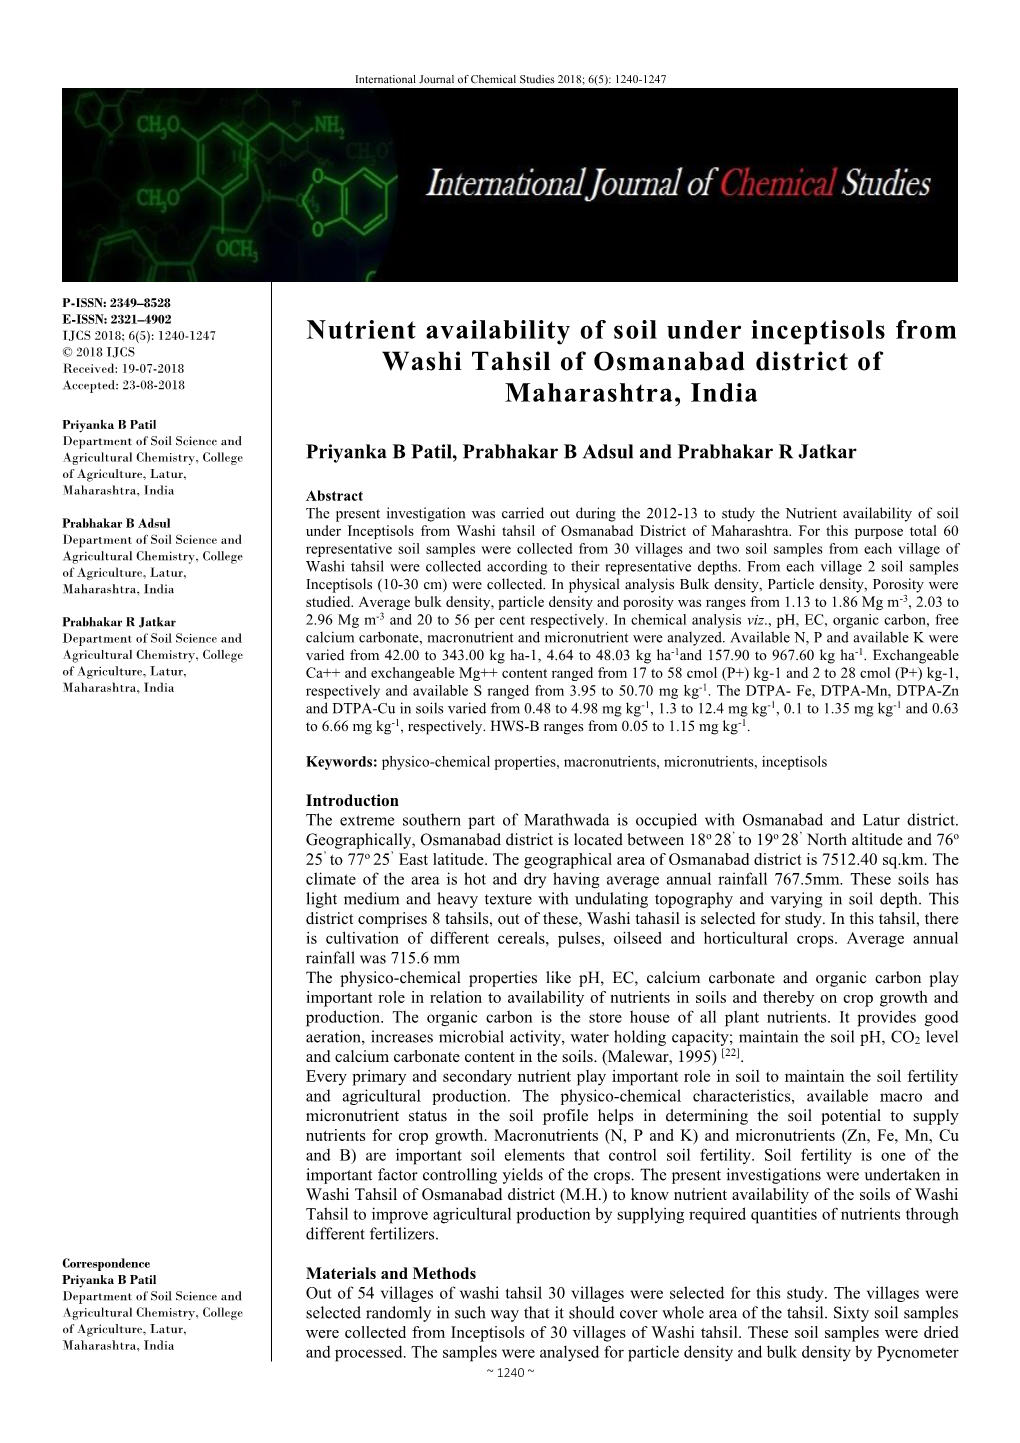 Nutrient Availability of Soil Under Inceptisols from Washi Tahsil Of